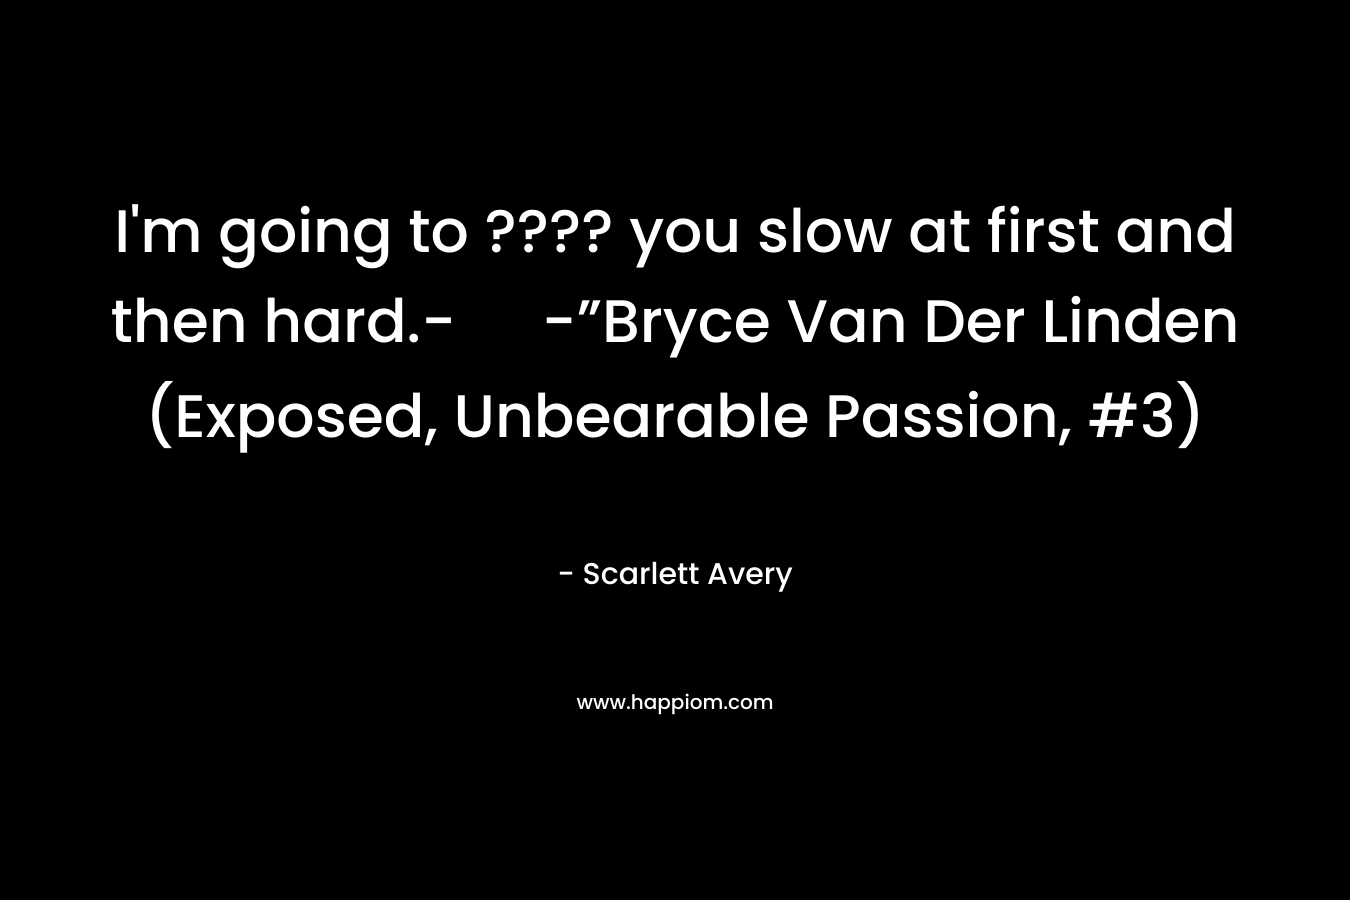 I’m going to ???? you slow at first and then hard.- -”Bryce Van Der Linden (Exposed, Unbearable Passion, #3) – Scarlett Avery